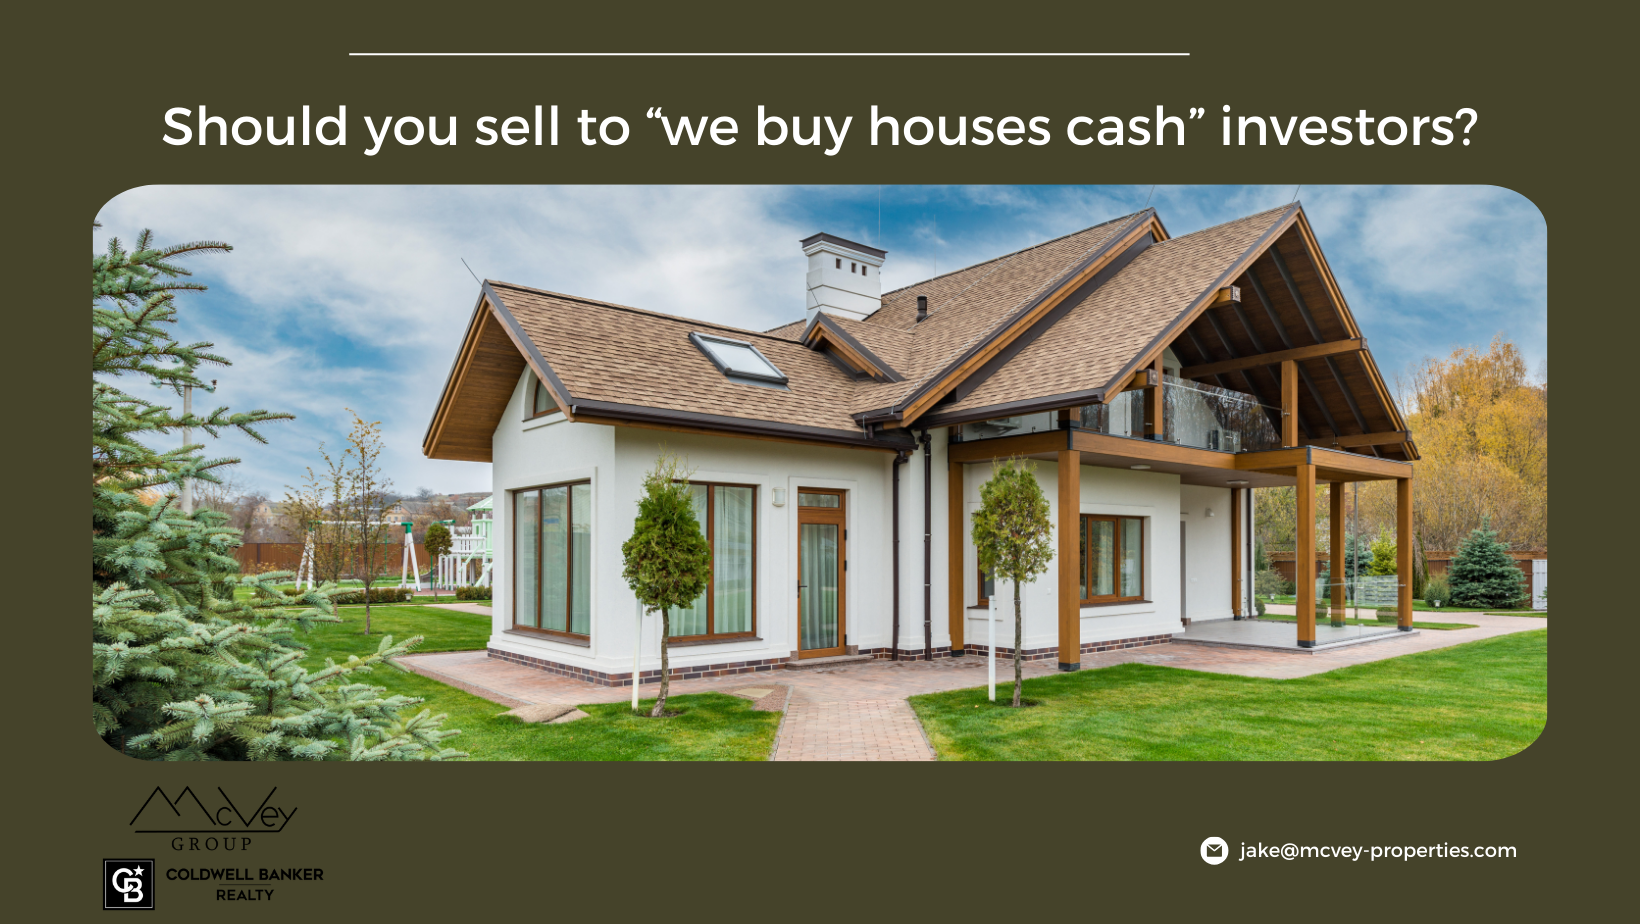 should you sell your house to "we buy houses cash" investors?